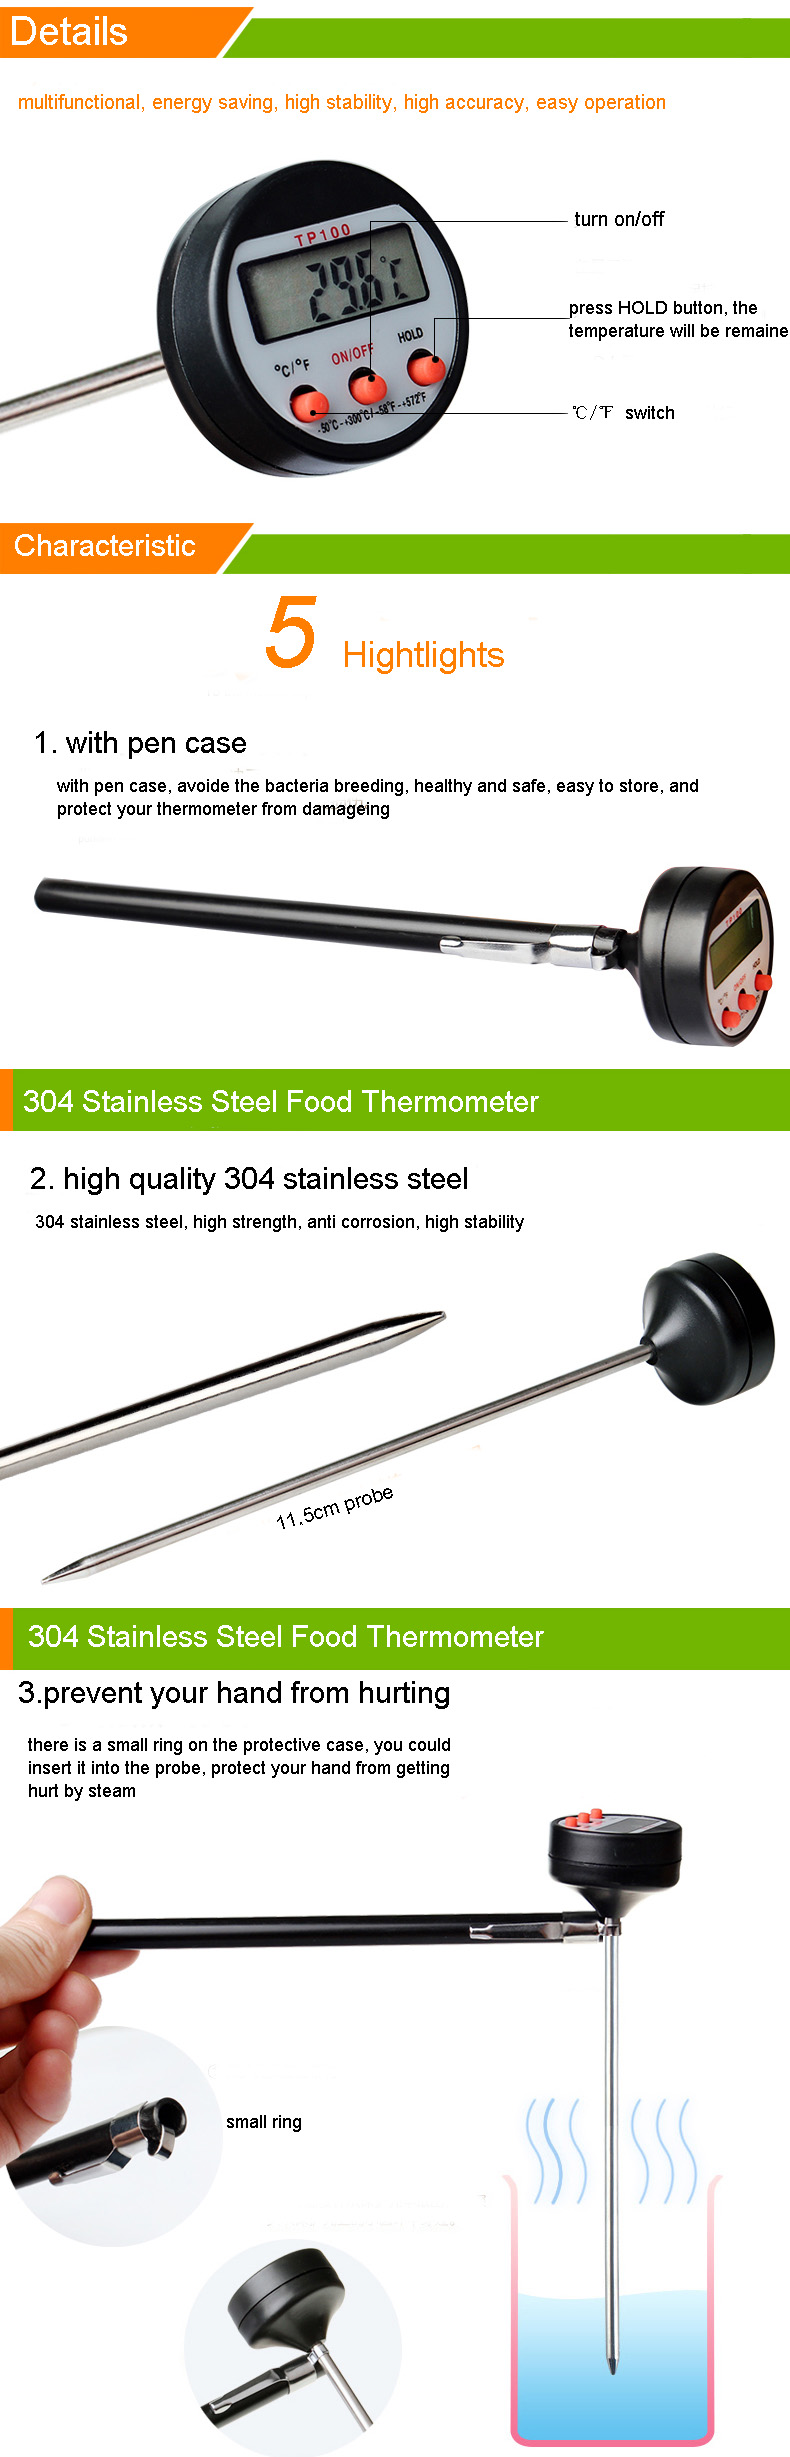 304-Stainless-Steel-Food-BBQ-Probe-Thermometer-Barbecue-Meat-Thermometer-Kitchen-Measuring-Tool-1045708-3